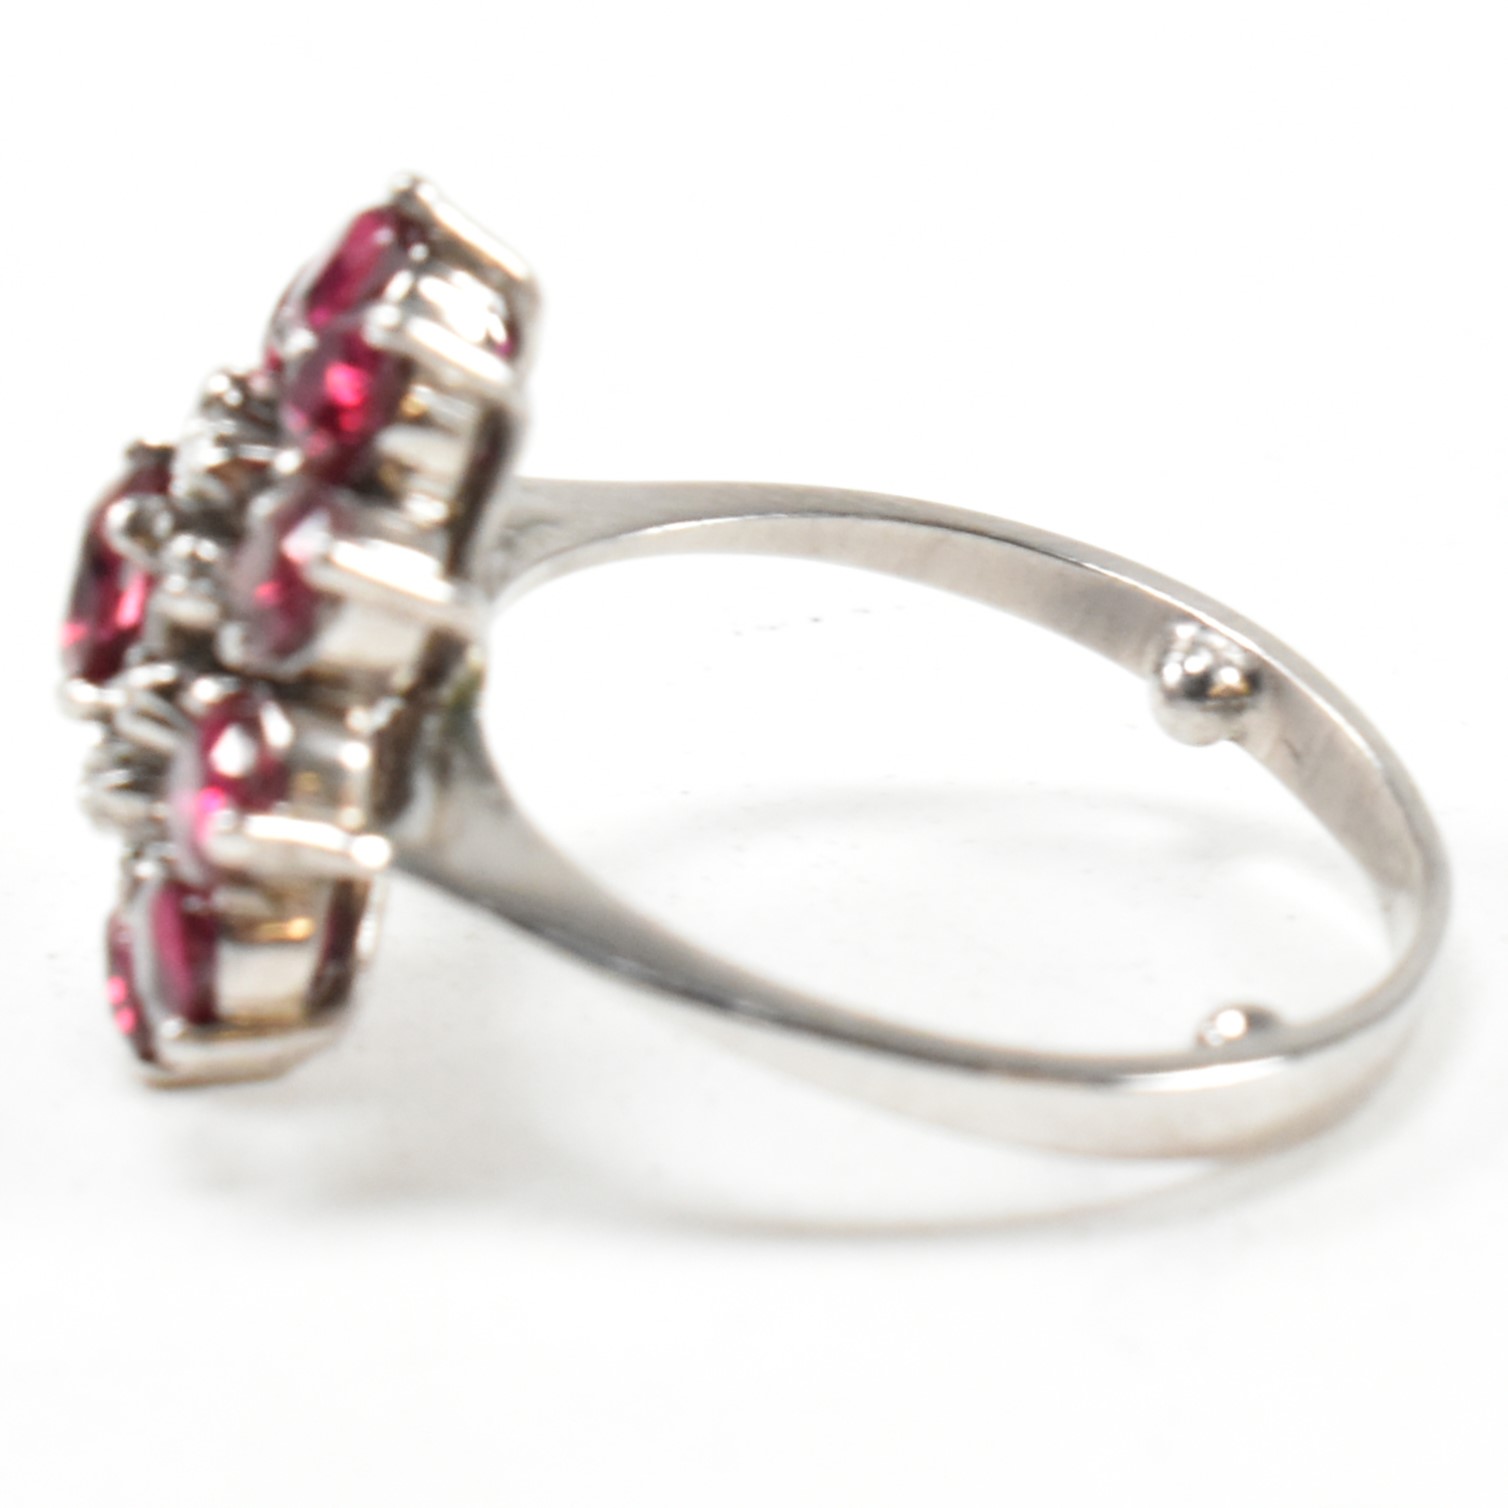 WHITE GOLD RUBY & DIAOND CLUSTER RING - Image 7 of 8